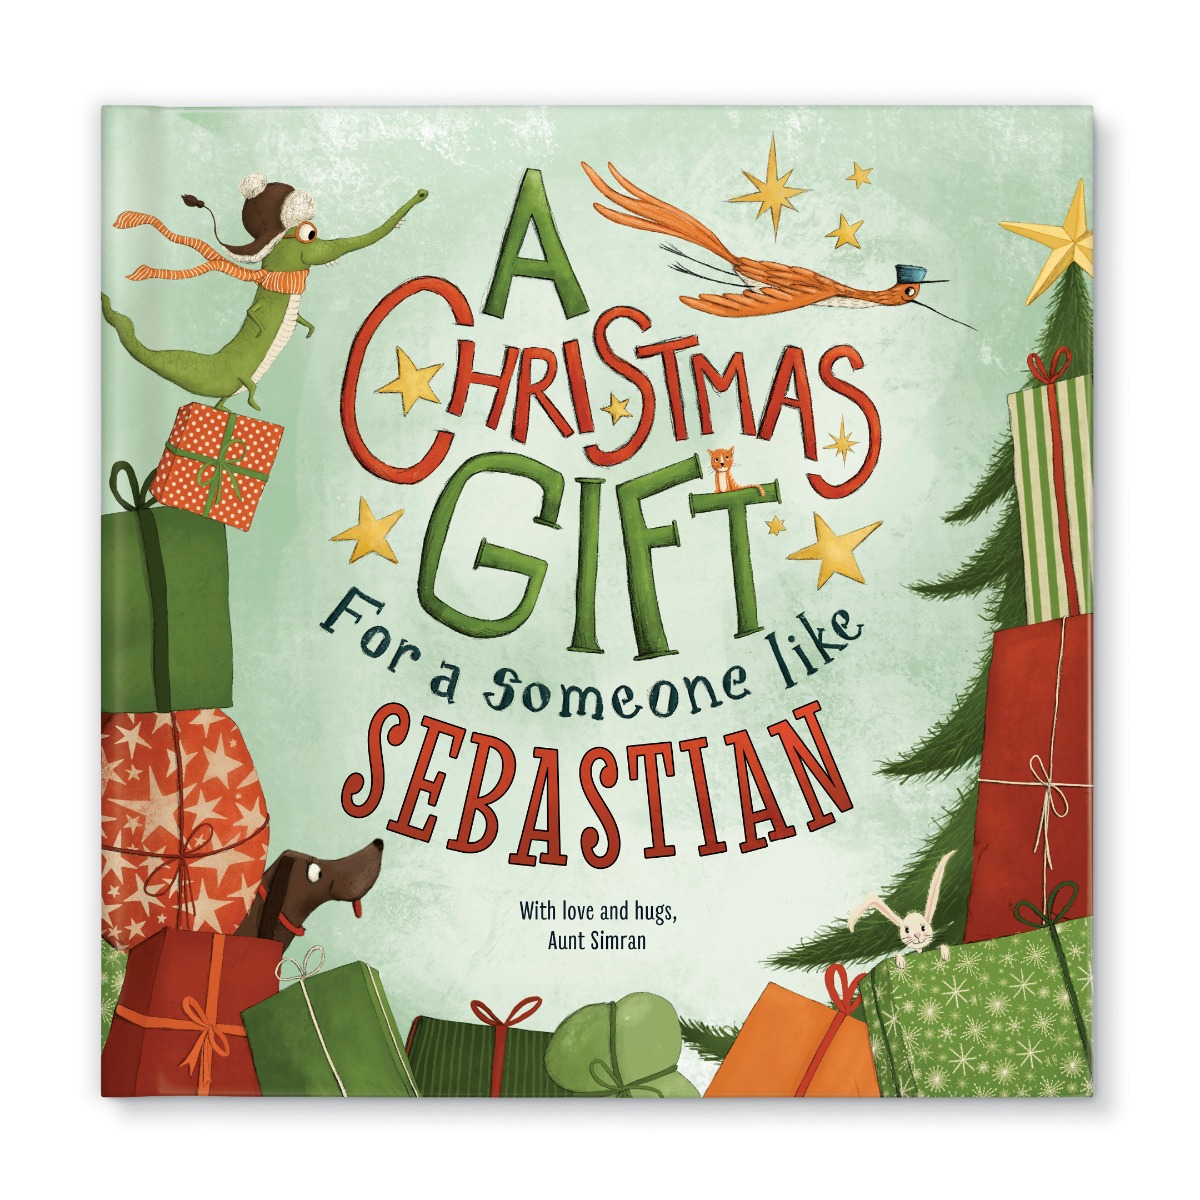  My Very Own Christmas Personalized Children's Story - I See  Me! (Hardcover) : Toys & Games